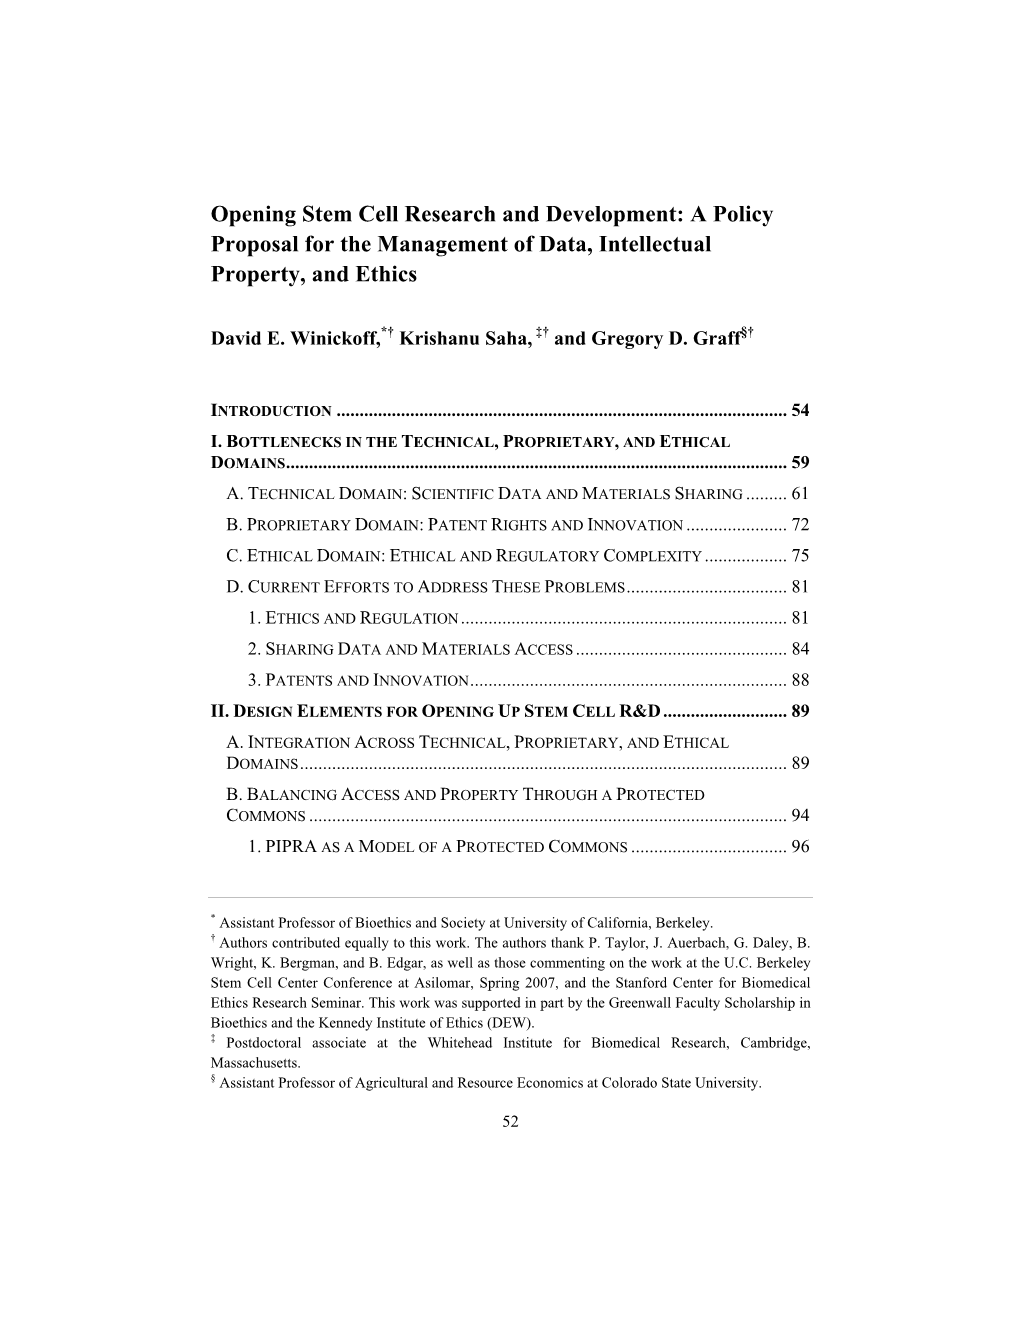 Opening Stem Cell Research and Development: a Policy Proposal for the Management of Data, Intellectual Property, and Ethics